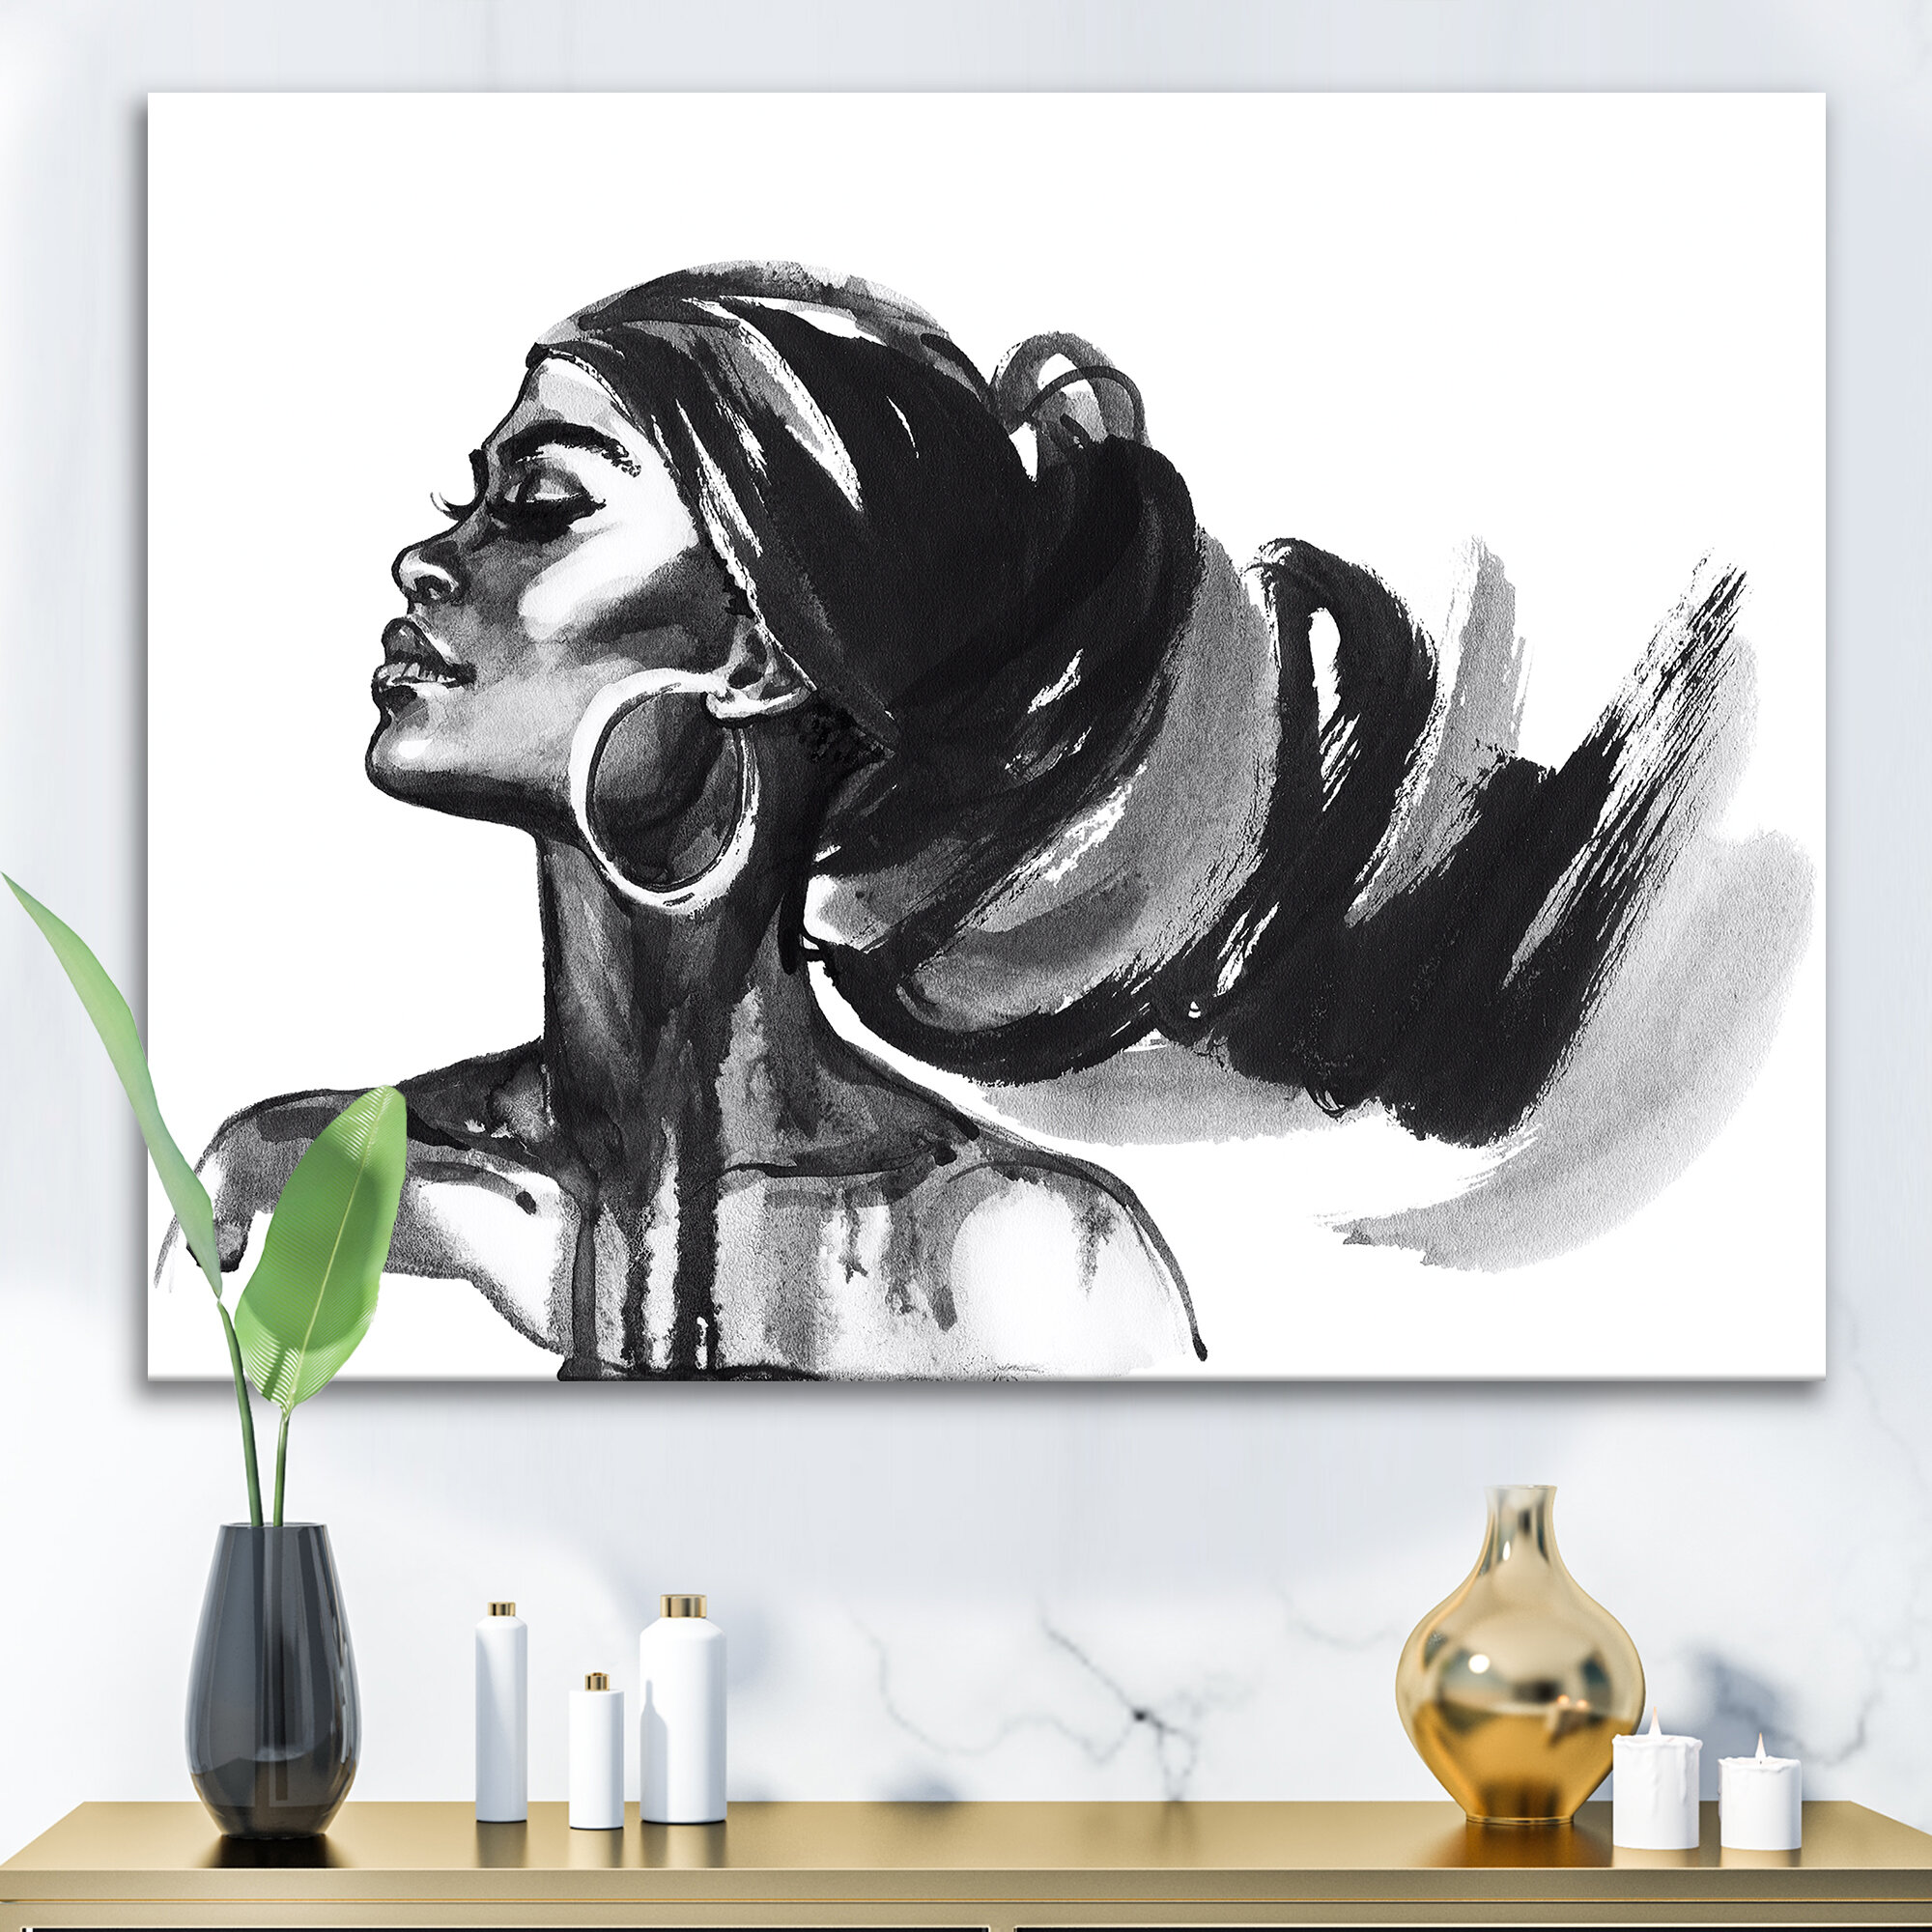 Bless international Monochrome Portrait Of African American Woman IV Framed  On Canvas Painting  Reviews Wayfair